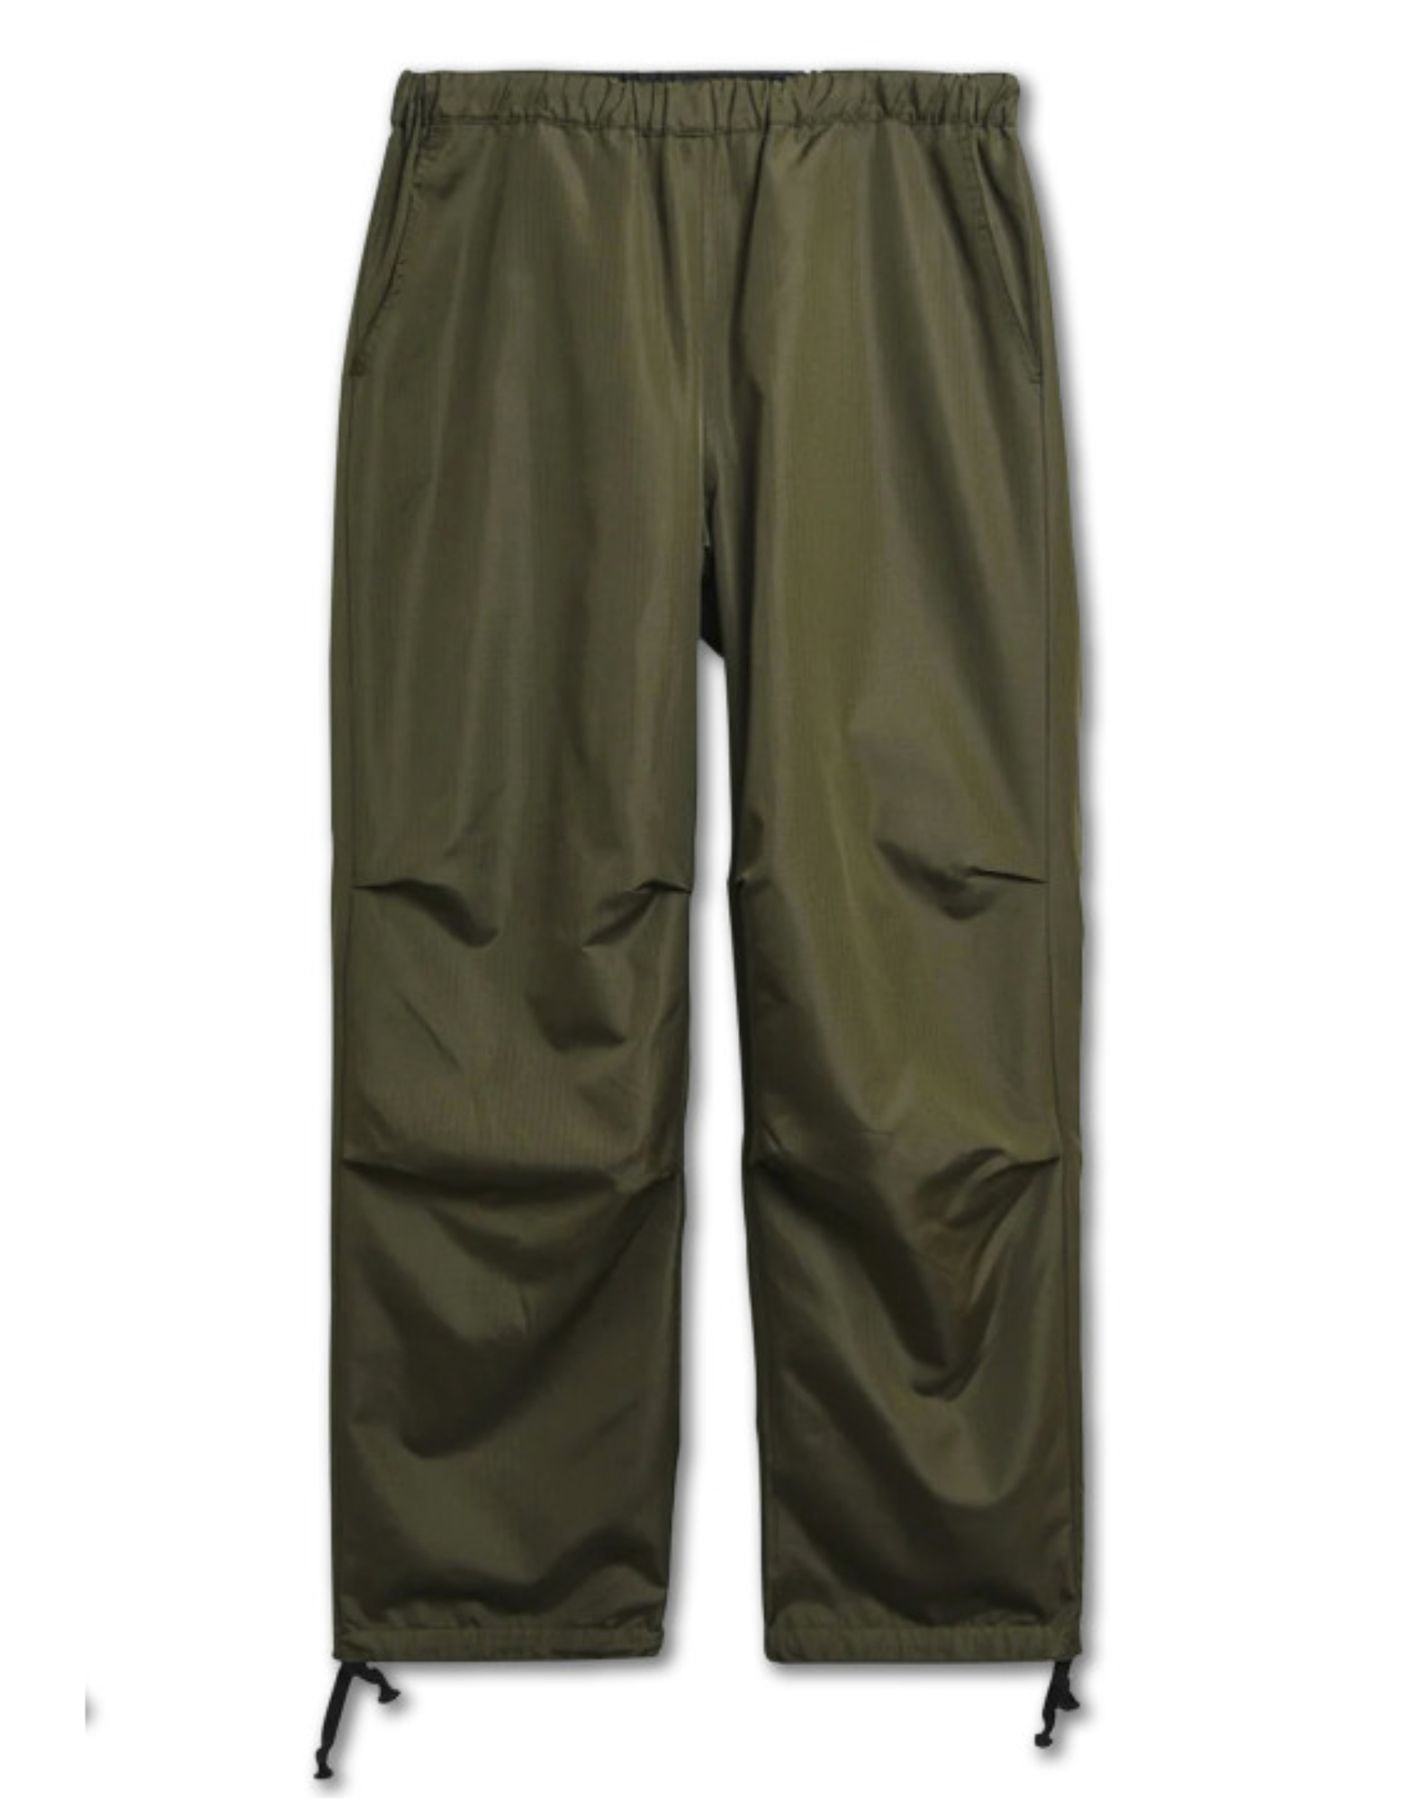 Pants for man R131NDML D OLIVE TAION